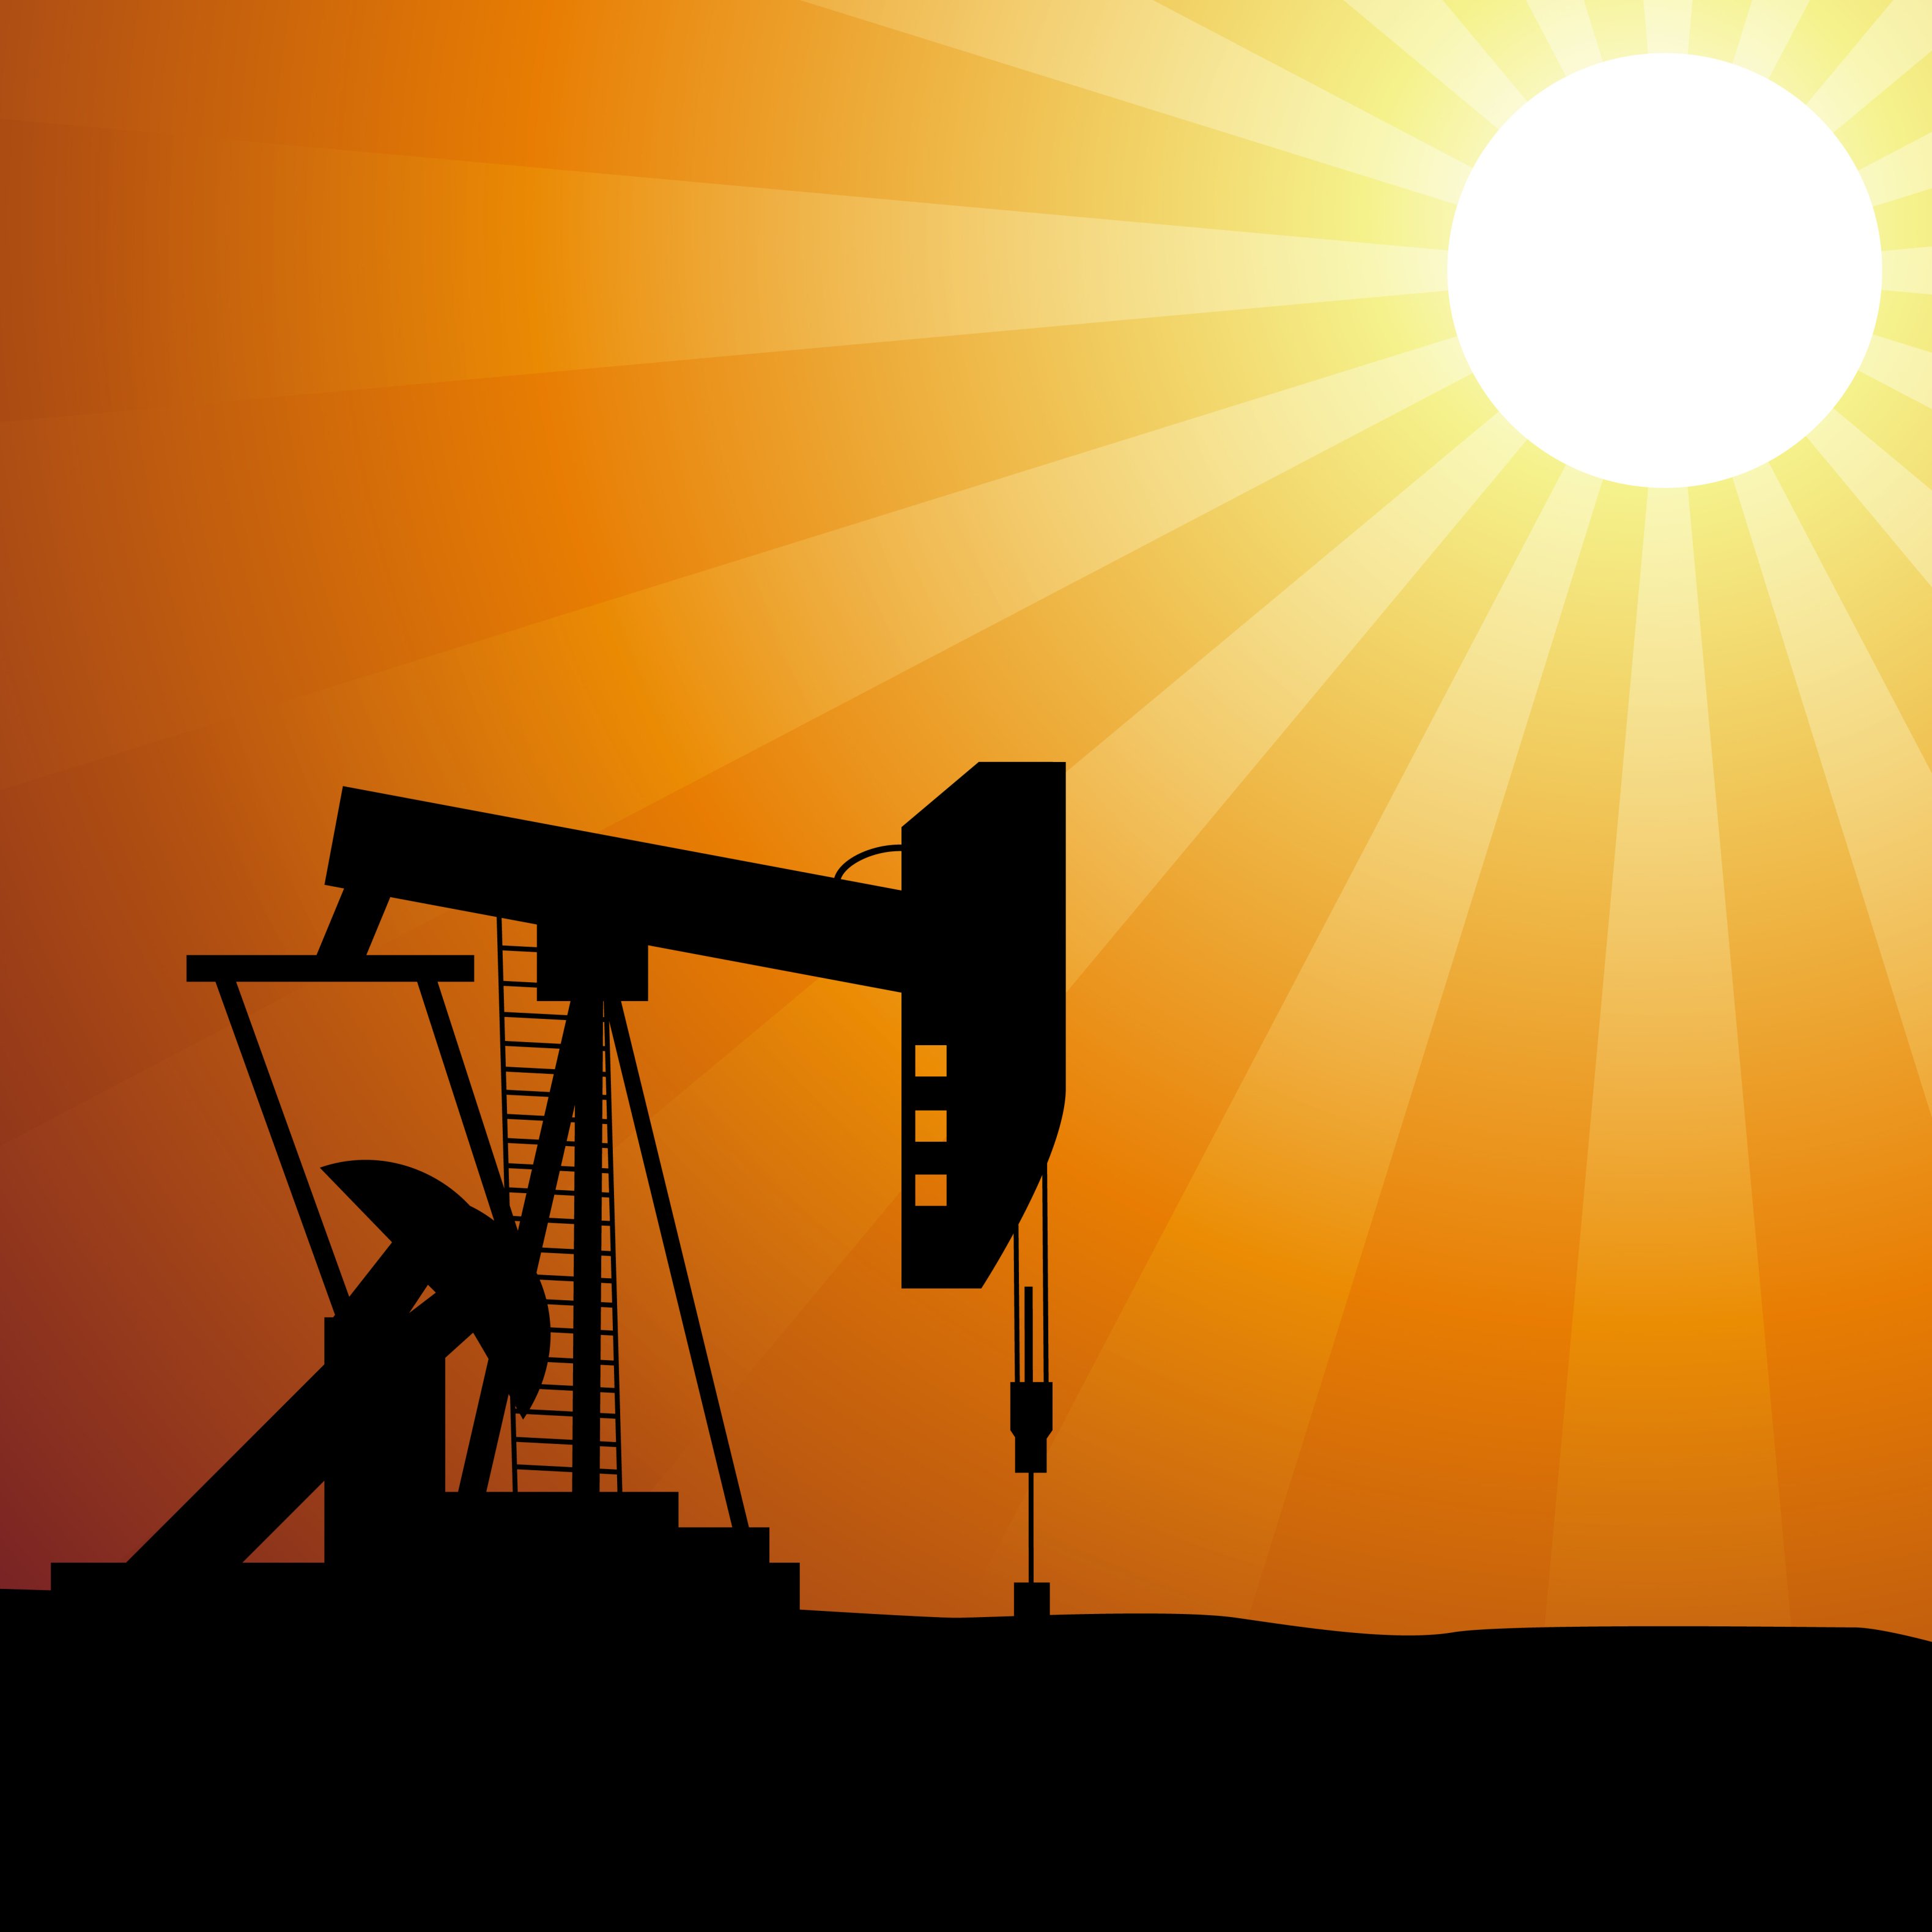 Oil well silhouette on sunset